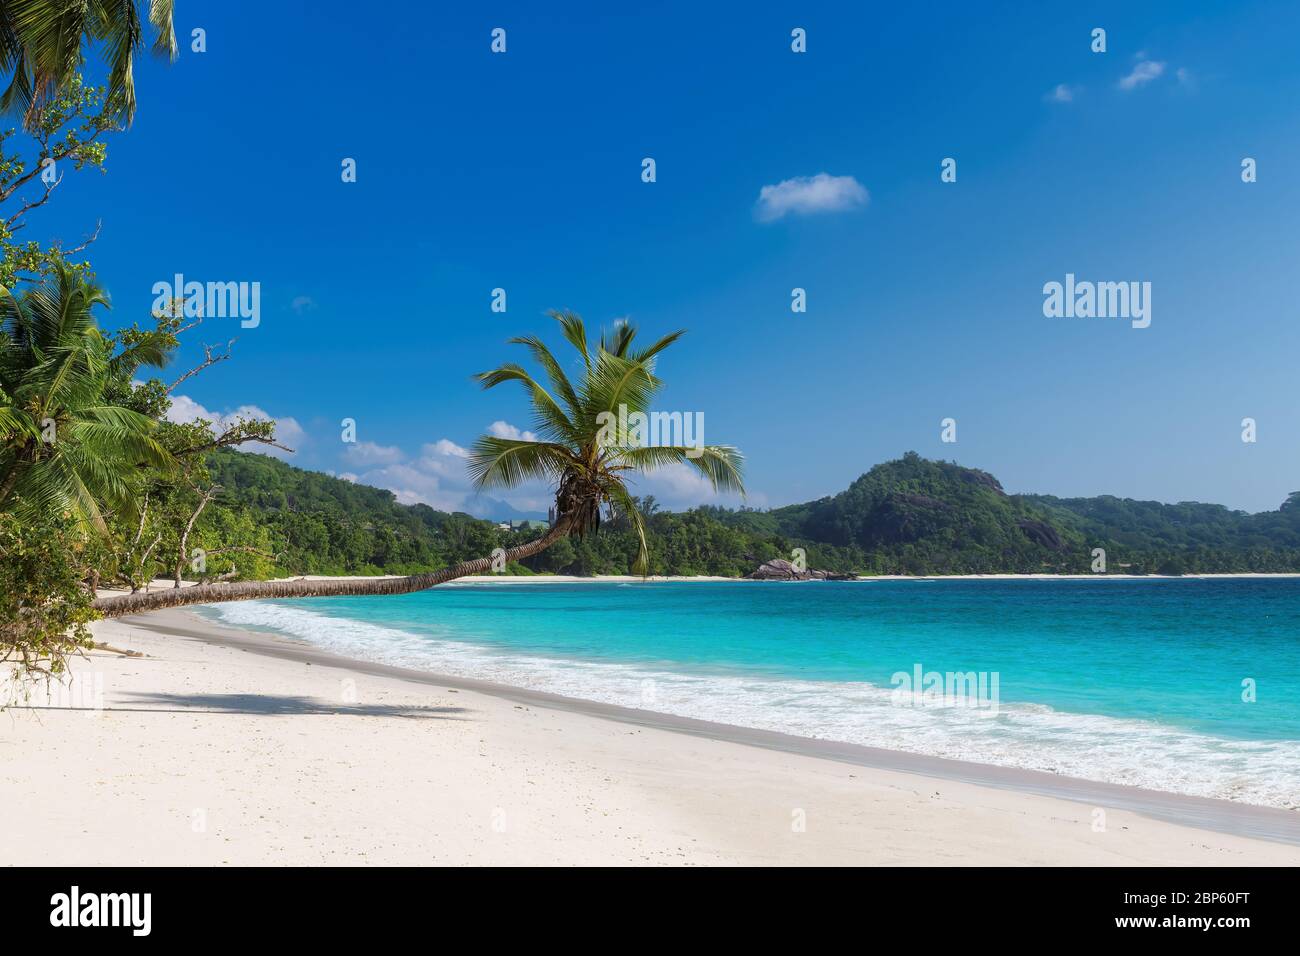 Tropical white sand beach with coco palms and the turquoise sea on Caribbean island. Stock Photo